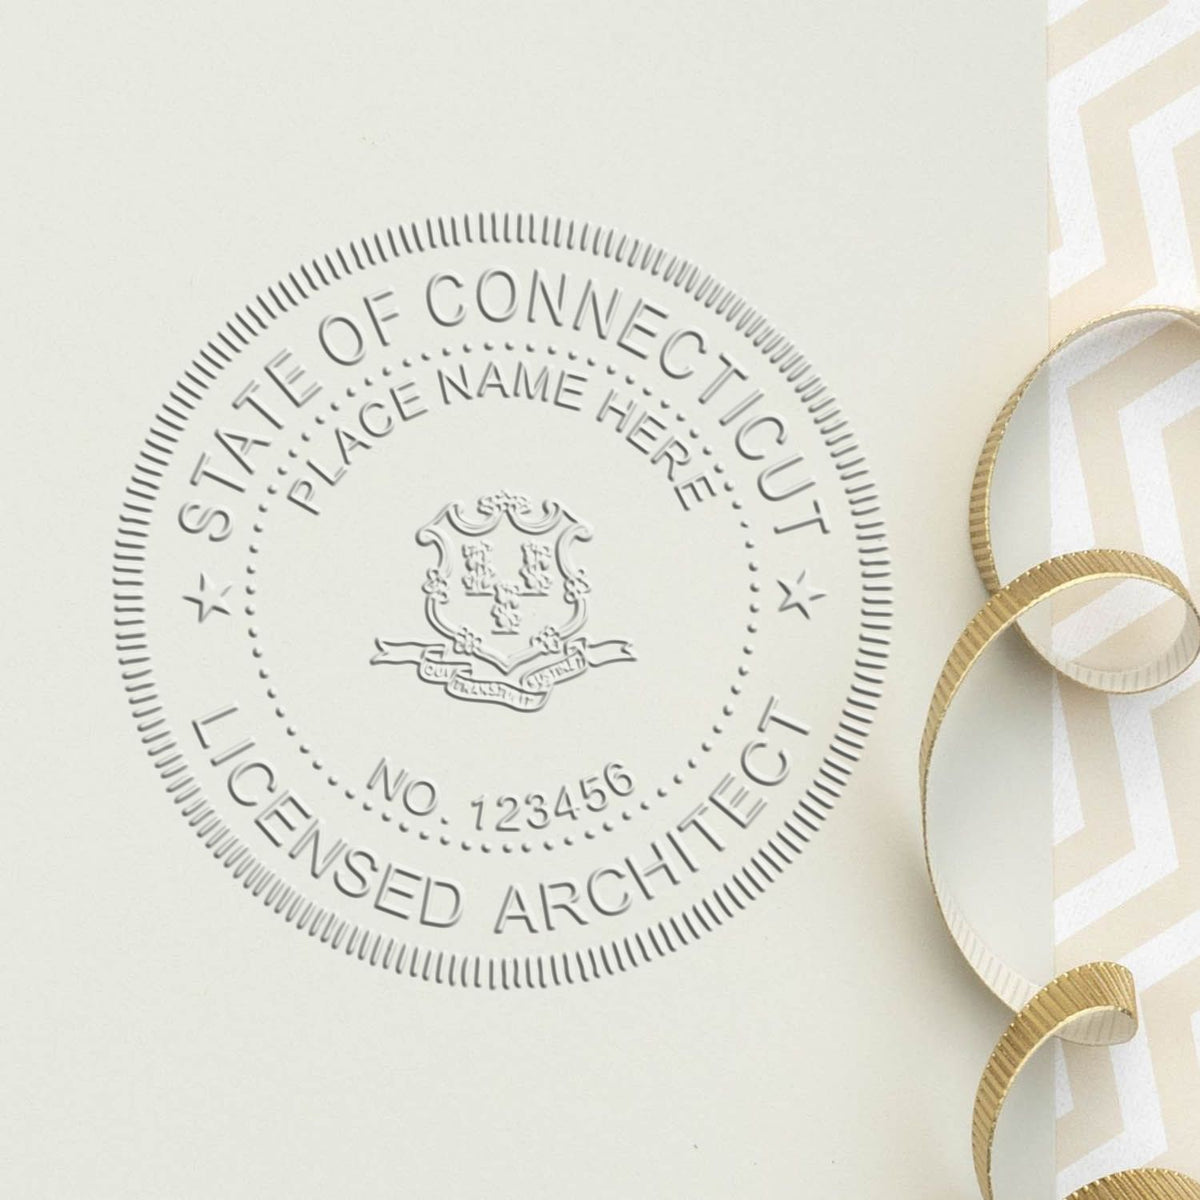 The Gift Connecticut Architect Seal stamp impression comes to life with a crisp, detailed image stamped on paper - showcasing true professional quality.